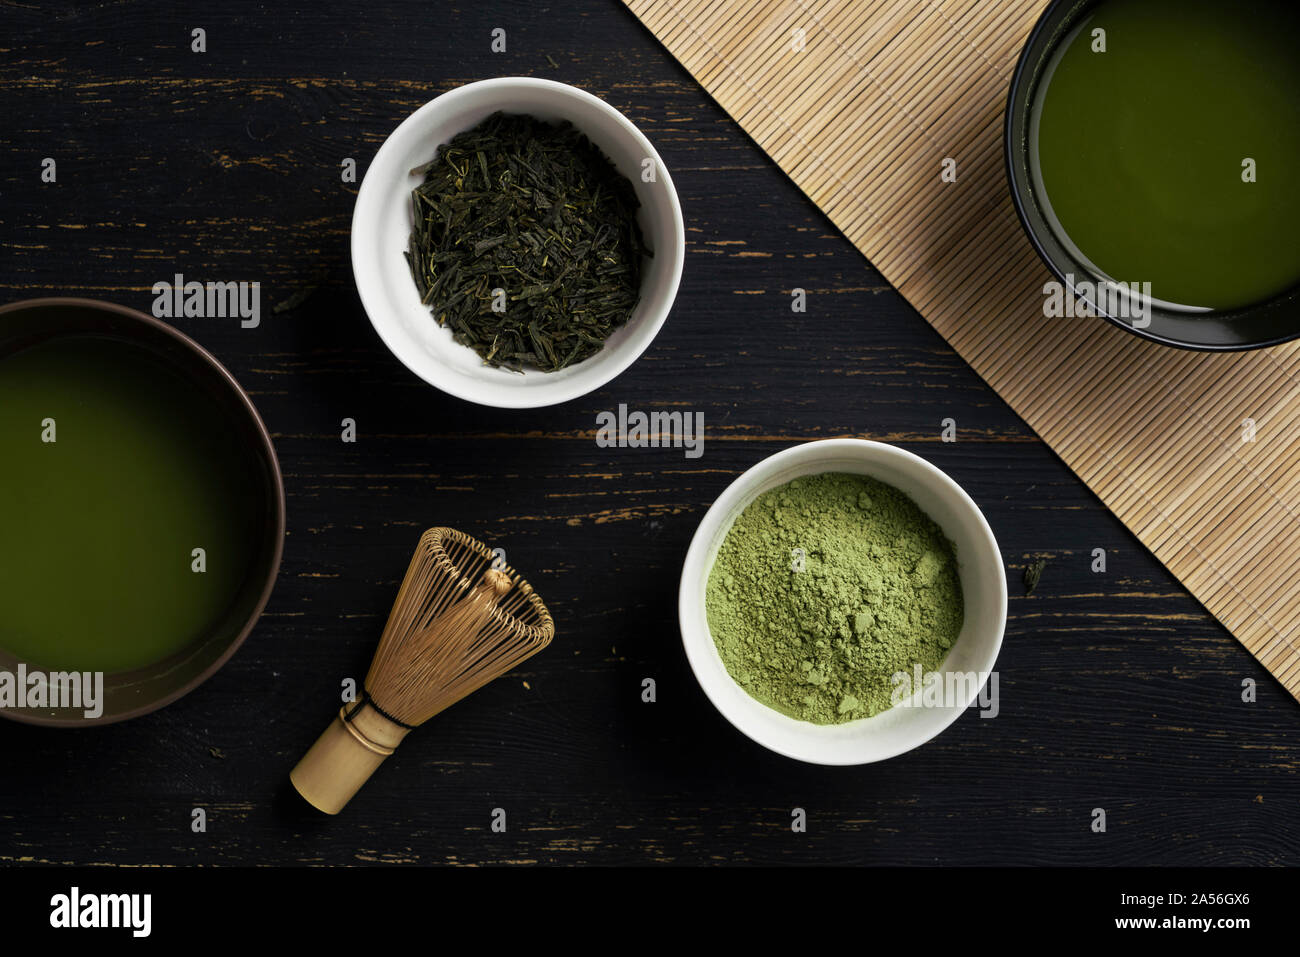 Still life of matcha tea preparation with whisk and bowls of matcha tea and tea powder, overhead view Stock Photo